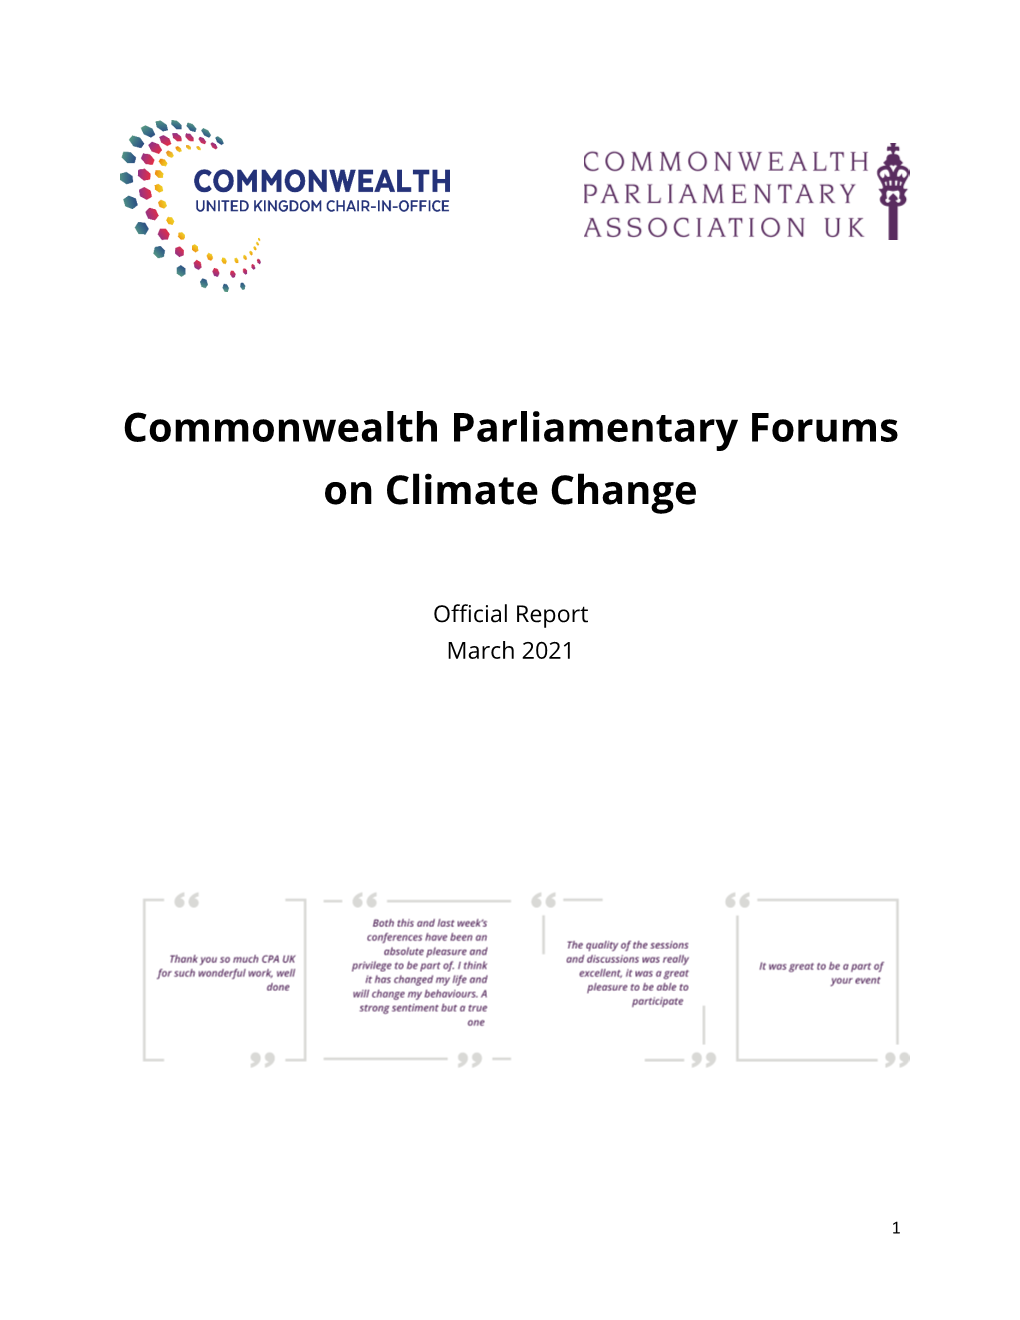 Commonwealth Parliamentary Forums on Climate Change